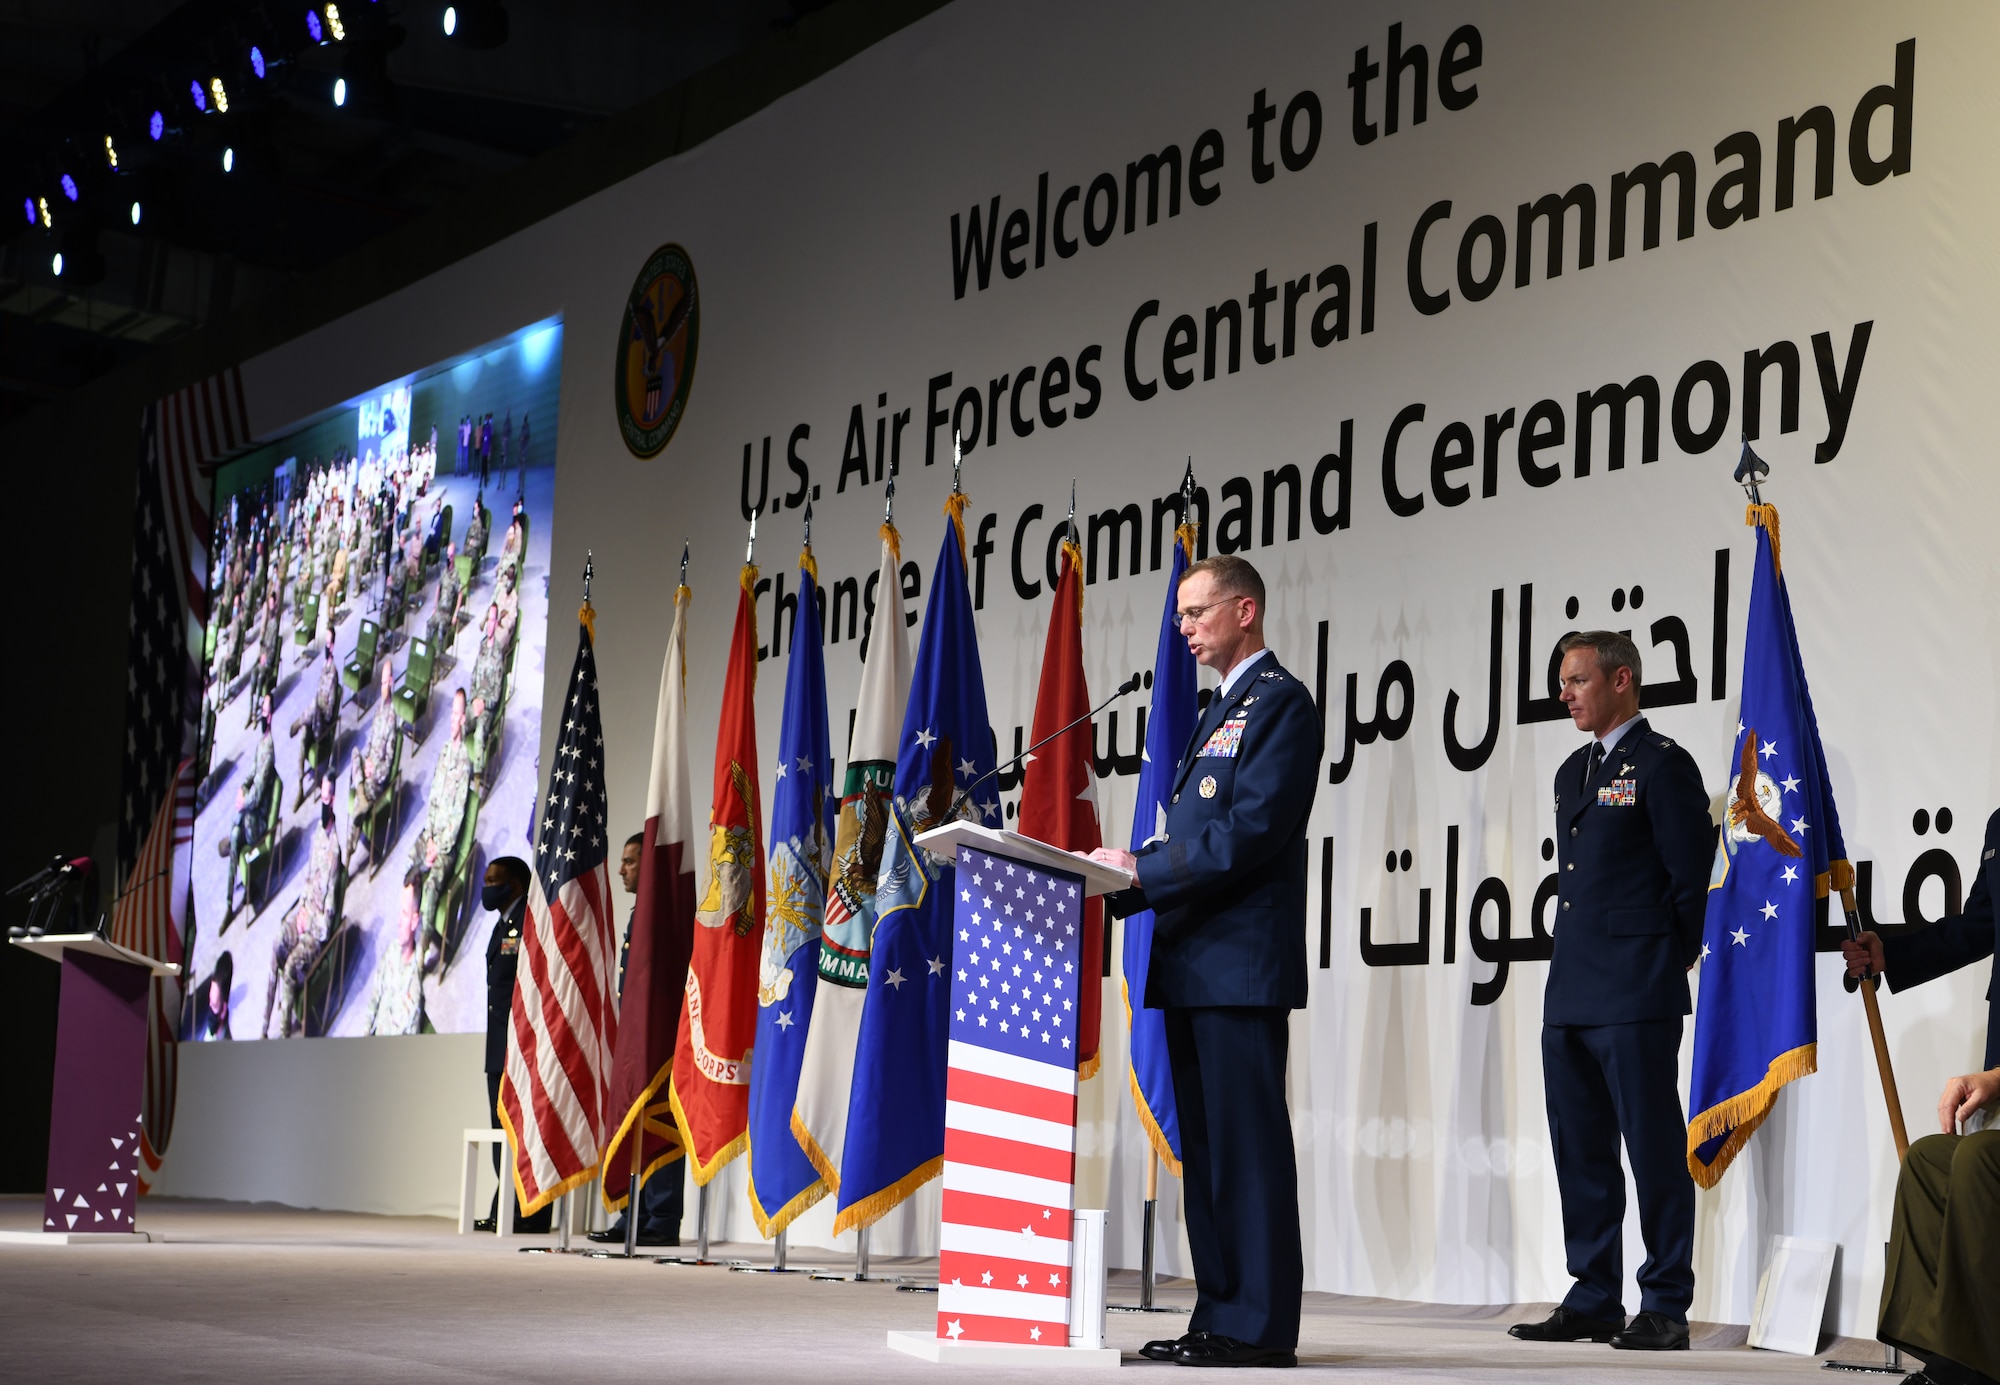 U.S. Air Force Lt. Gen. Gregory Guillot delivers remarks after becoming the commander of U.S. Air Forces Central Command and the combined forces air component commander during a change of command ceremony at Al Udeid Air Base, Qatar, July 16, 2020.